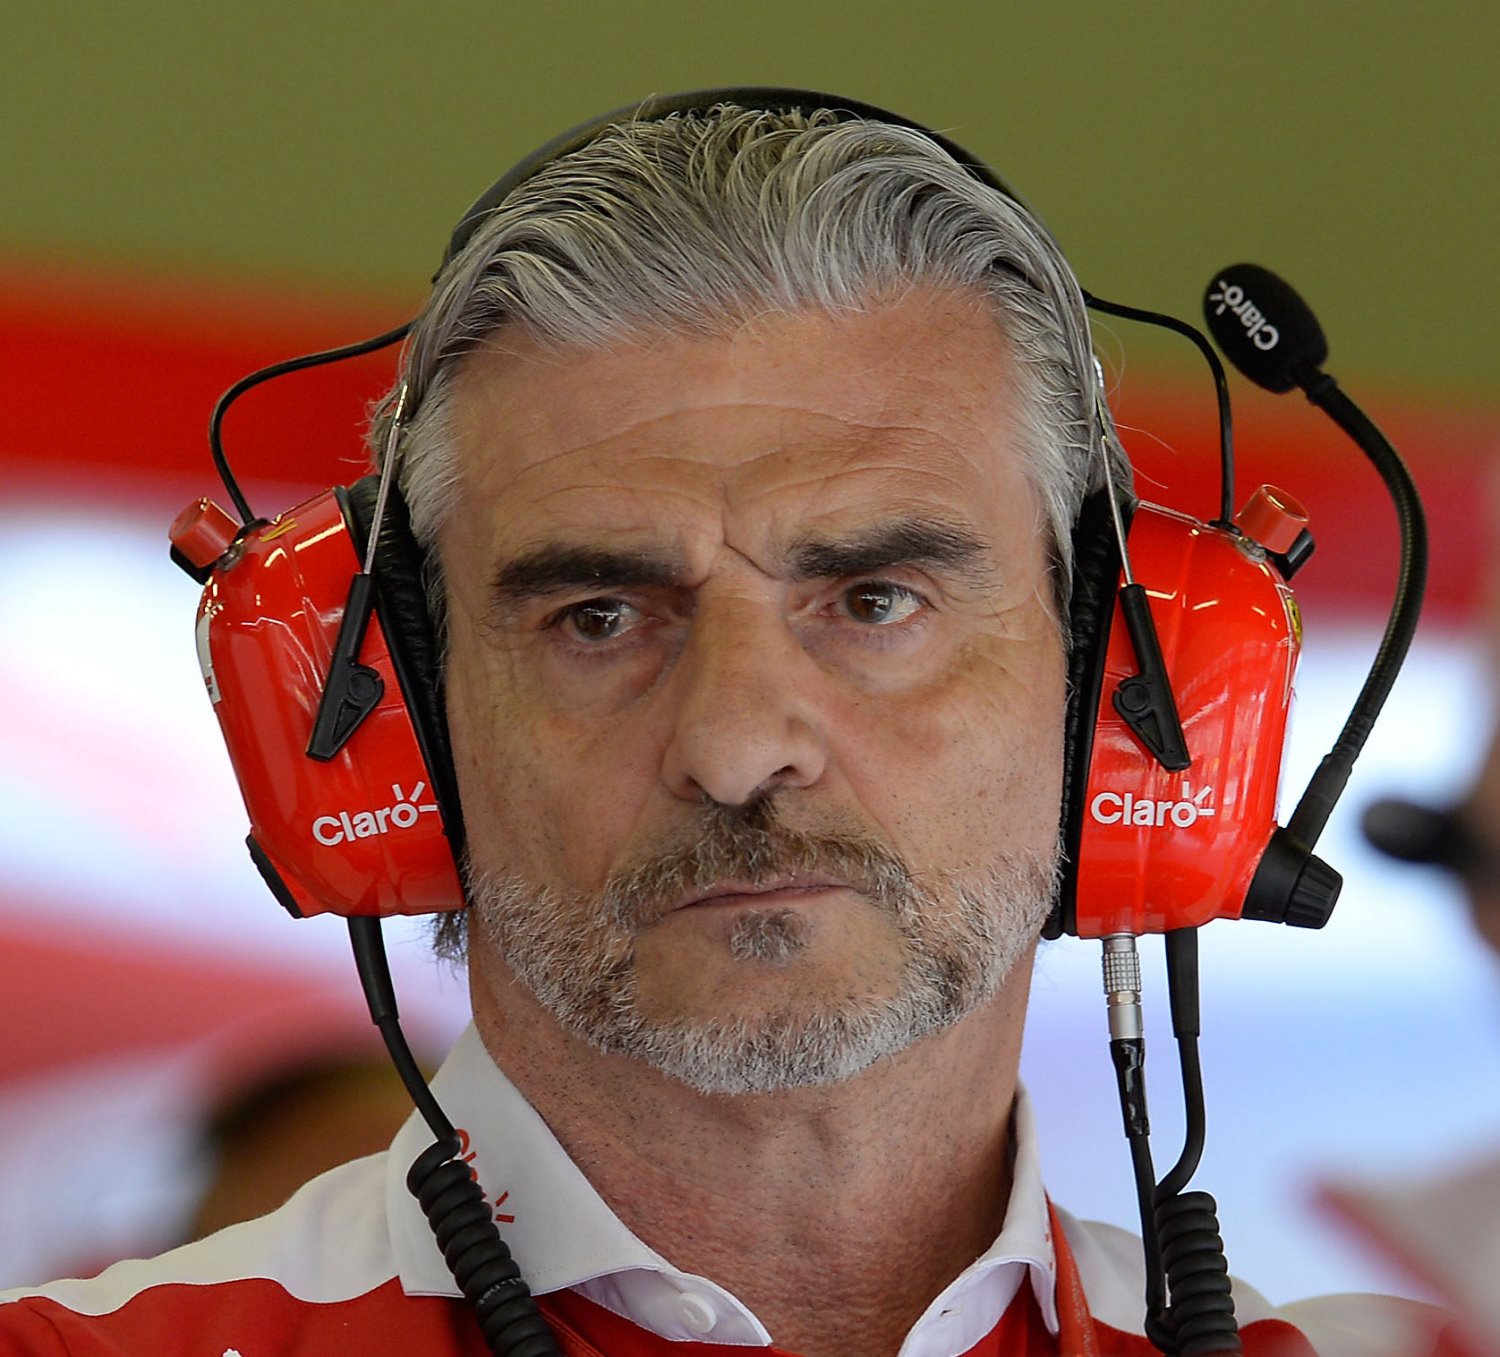 Maurizio Arrivabene must be on some hallucinagin to not think Ferrari's title chances are not gone